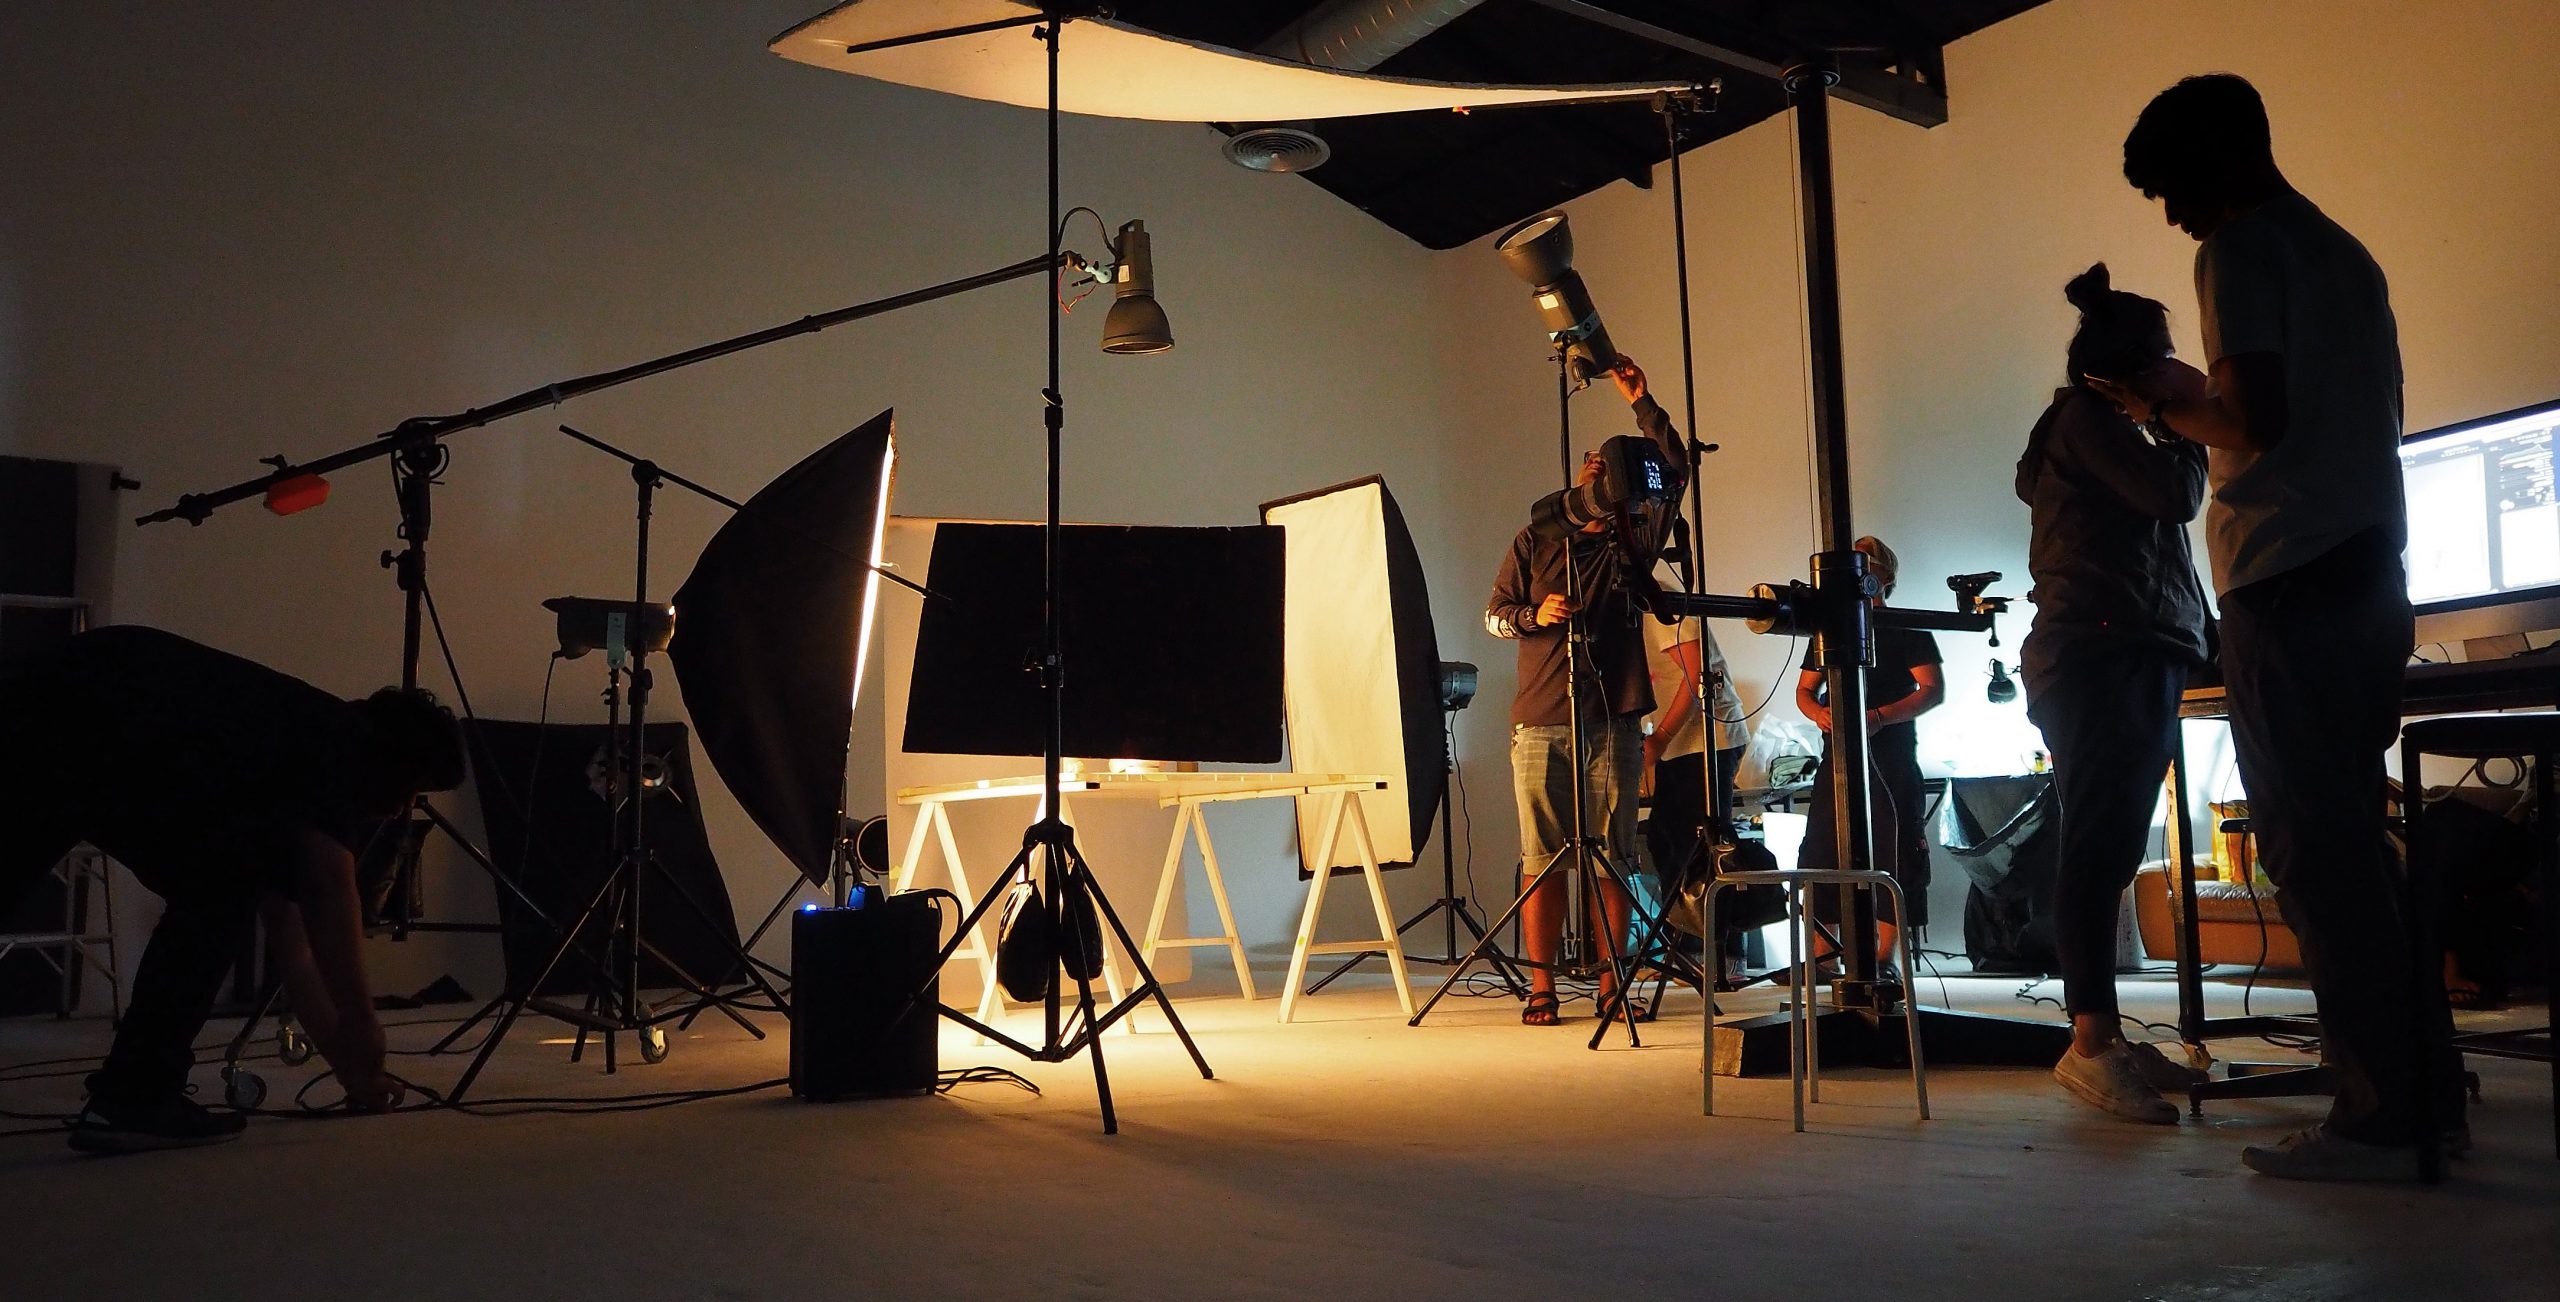 5 Tips in Finding the Right Video Production Company